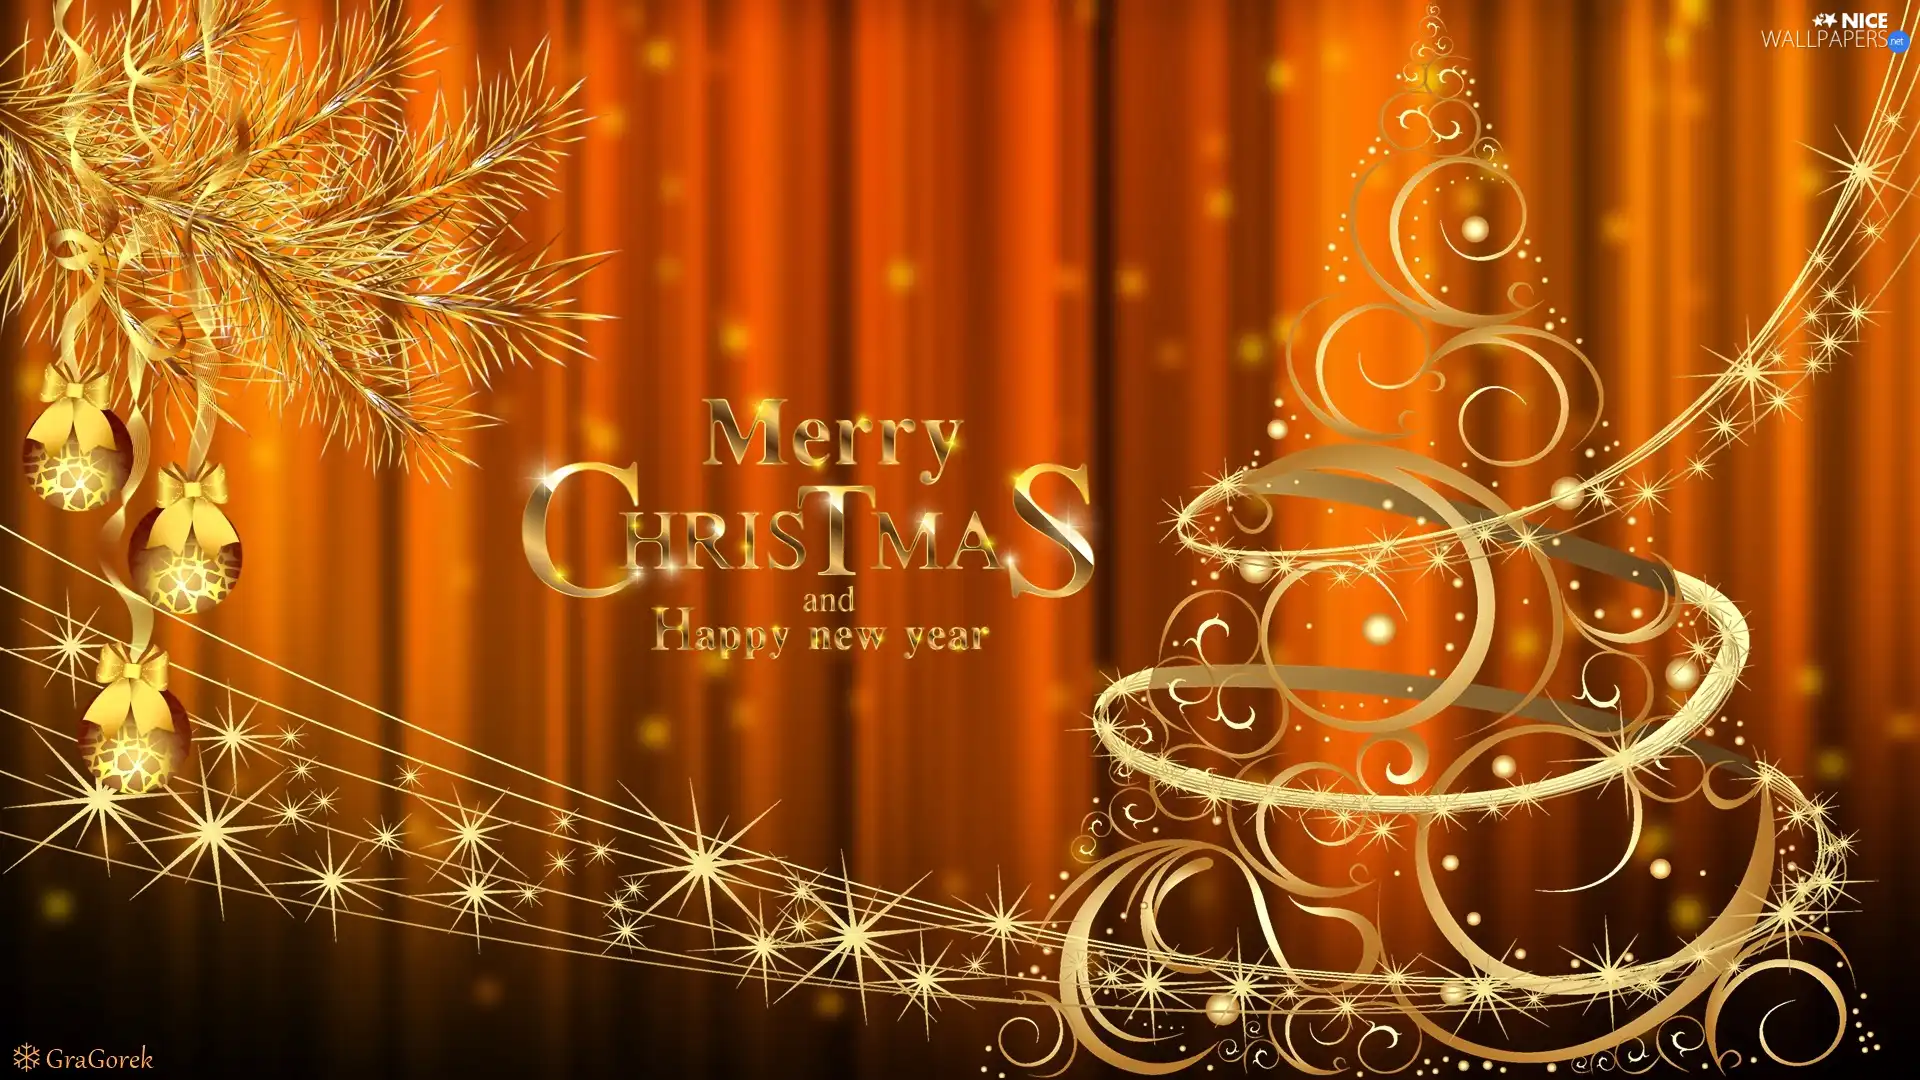 Golden, Christmas, Wishes, graphics, text, christmas tree